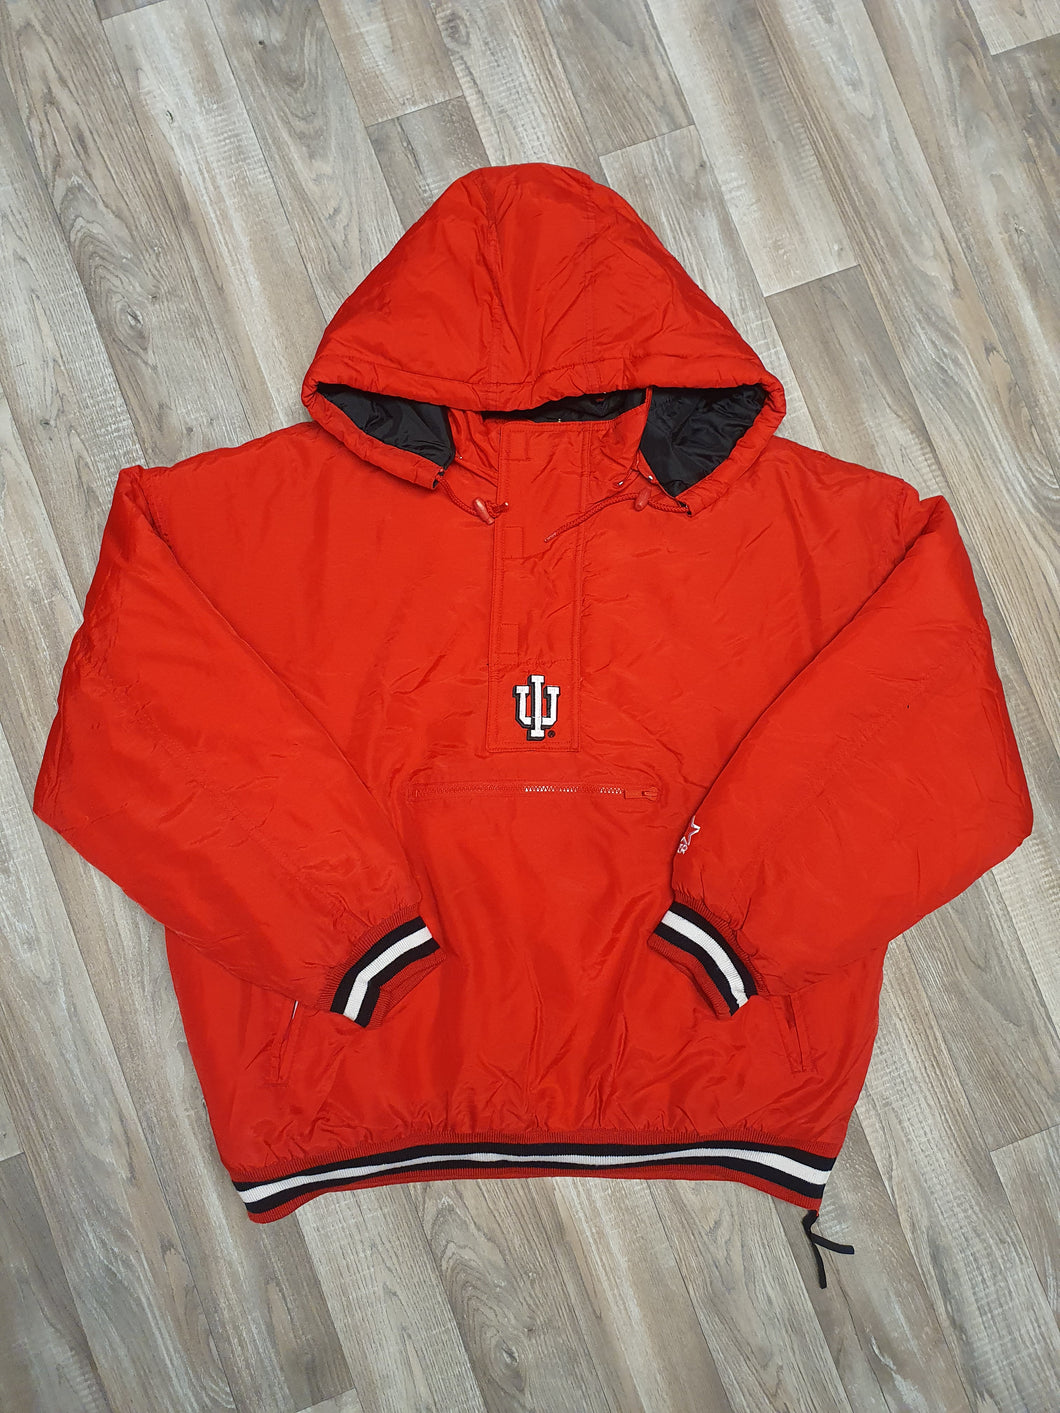 🏀 Indiana Hoosiers Jacket Size Large – The Throwback Store 🏀